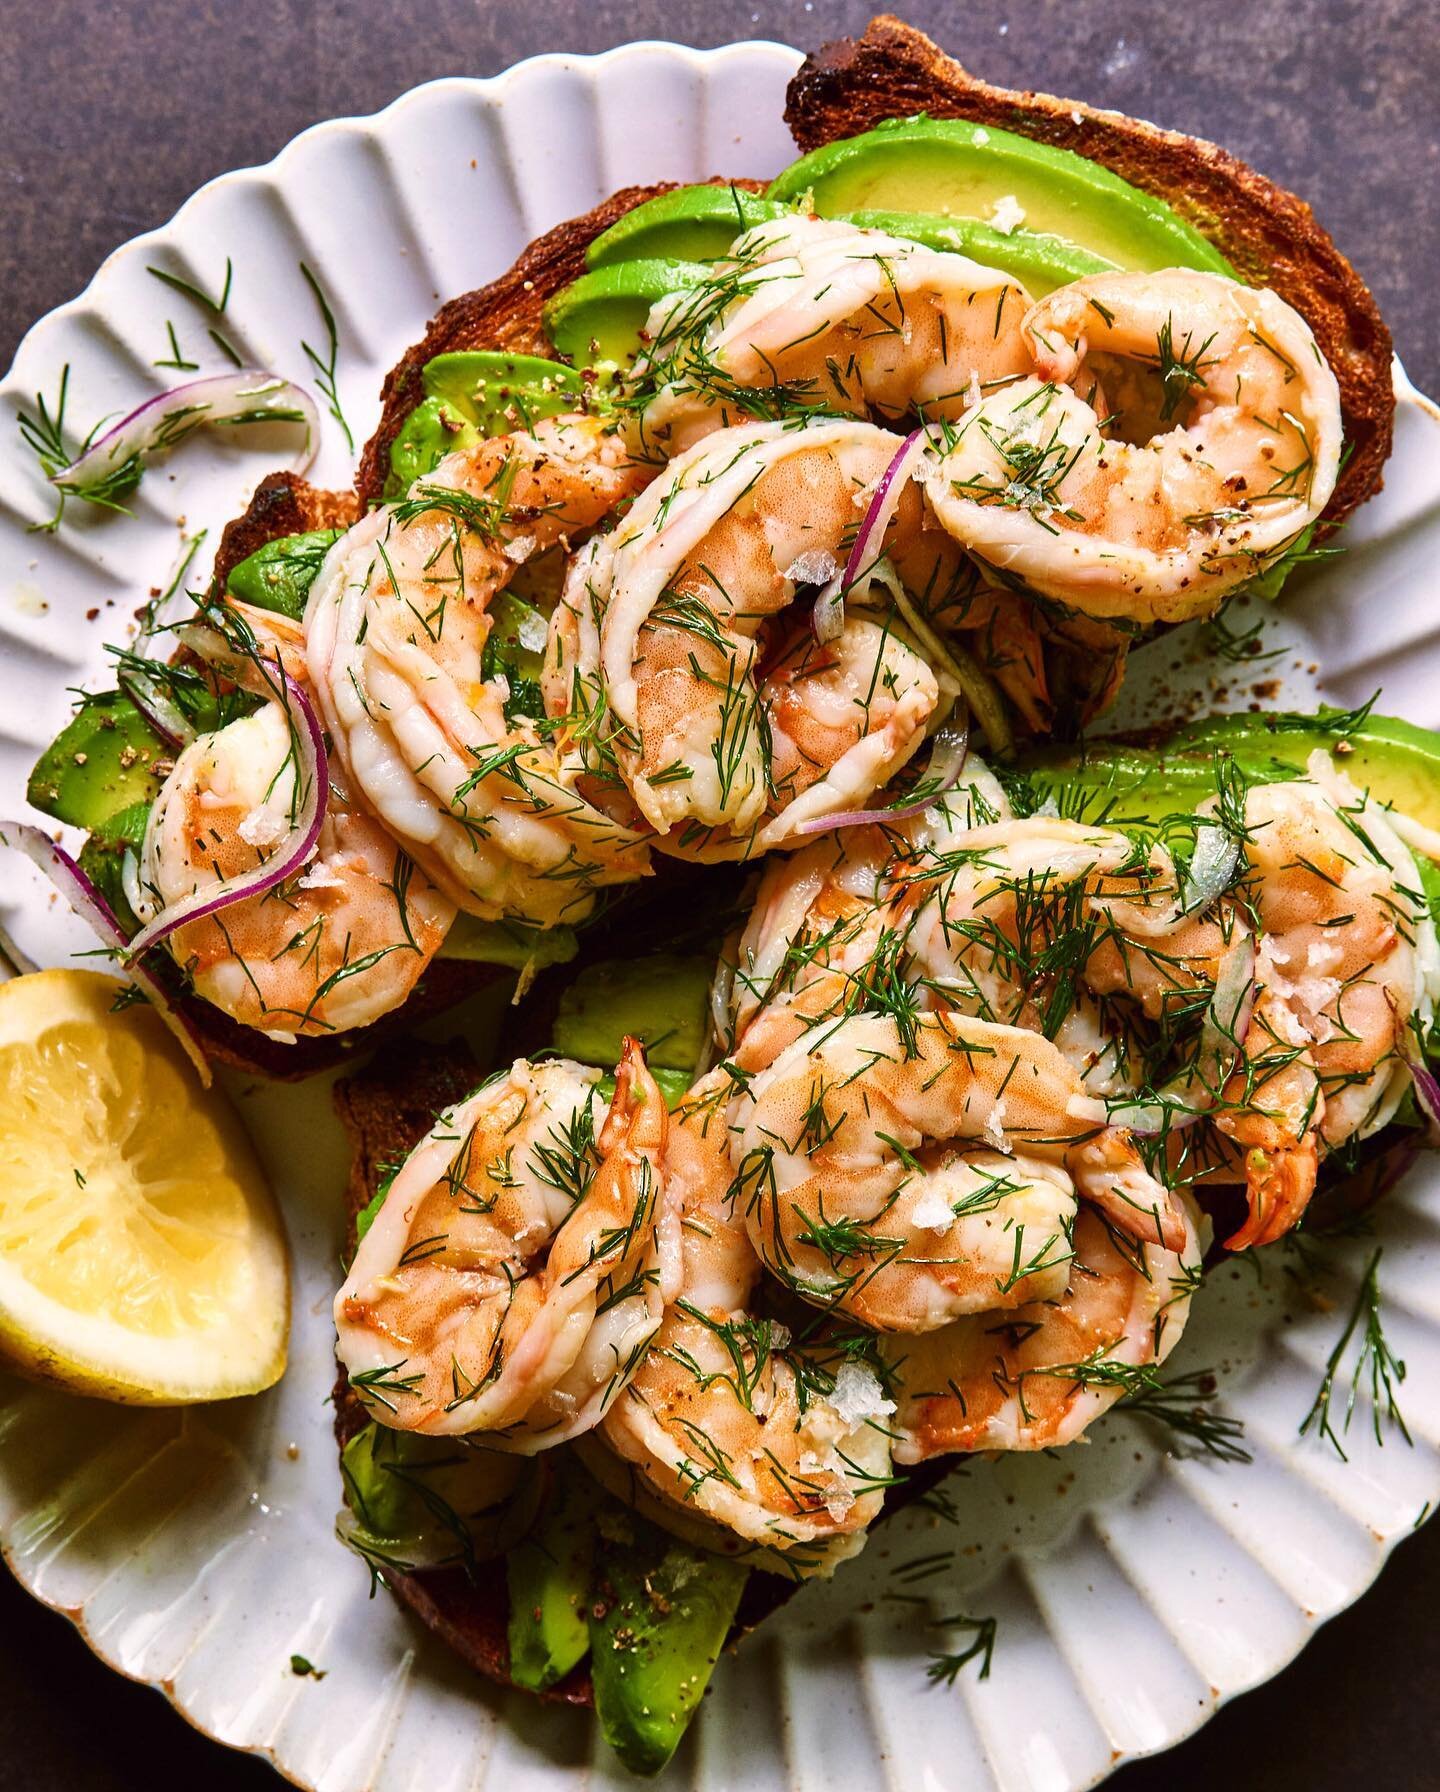 MAKE THIS DISH: Luscious, plump+tender shrimp salad with a proper umami kick! Swap the gloppy mayo for my version: showered in fresh dill and tossed with extra-savory fish sauce+lemon juice vinaigrette. Then pile it on toast (bonus, with creamy 🥑). 